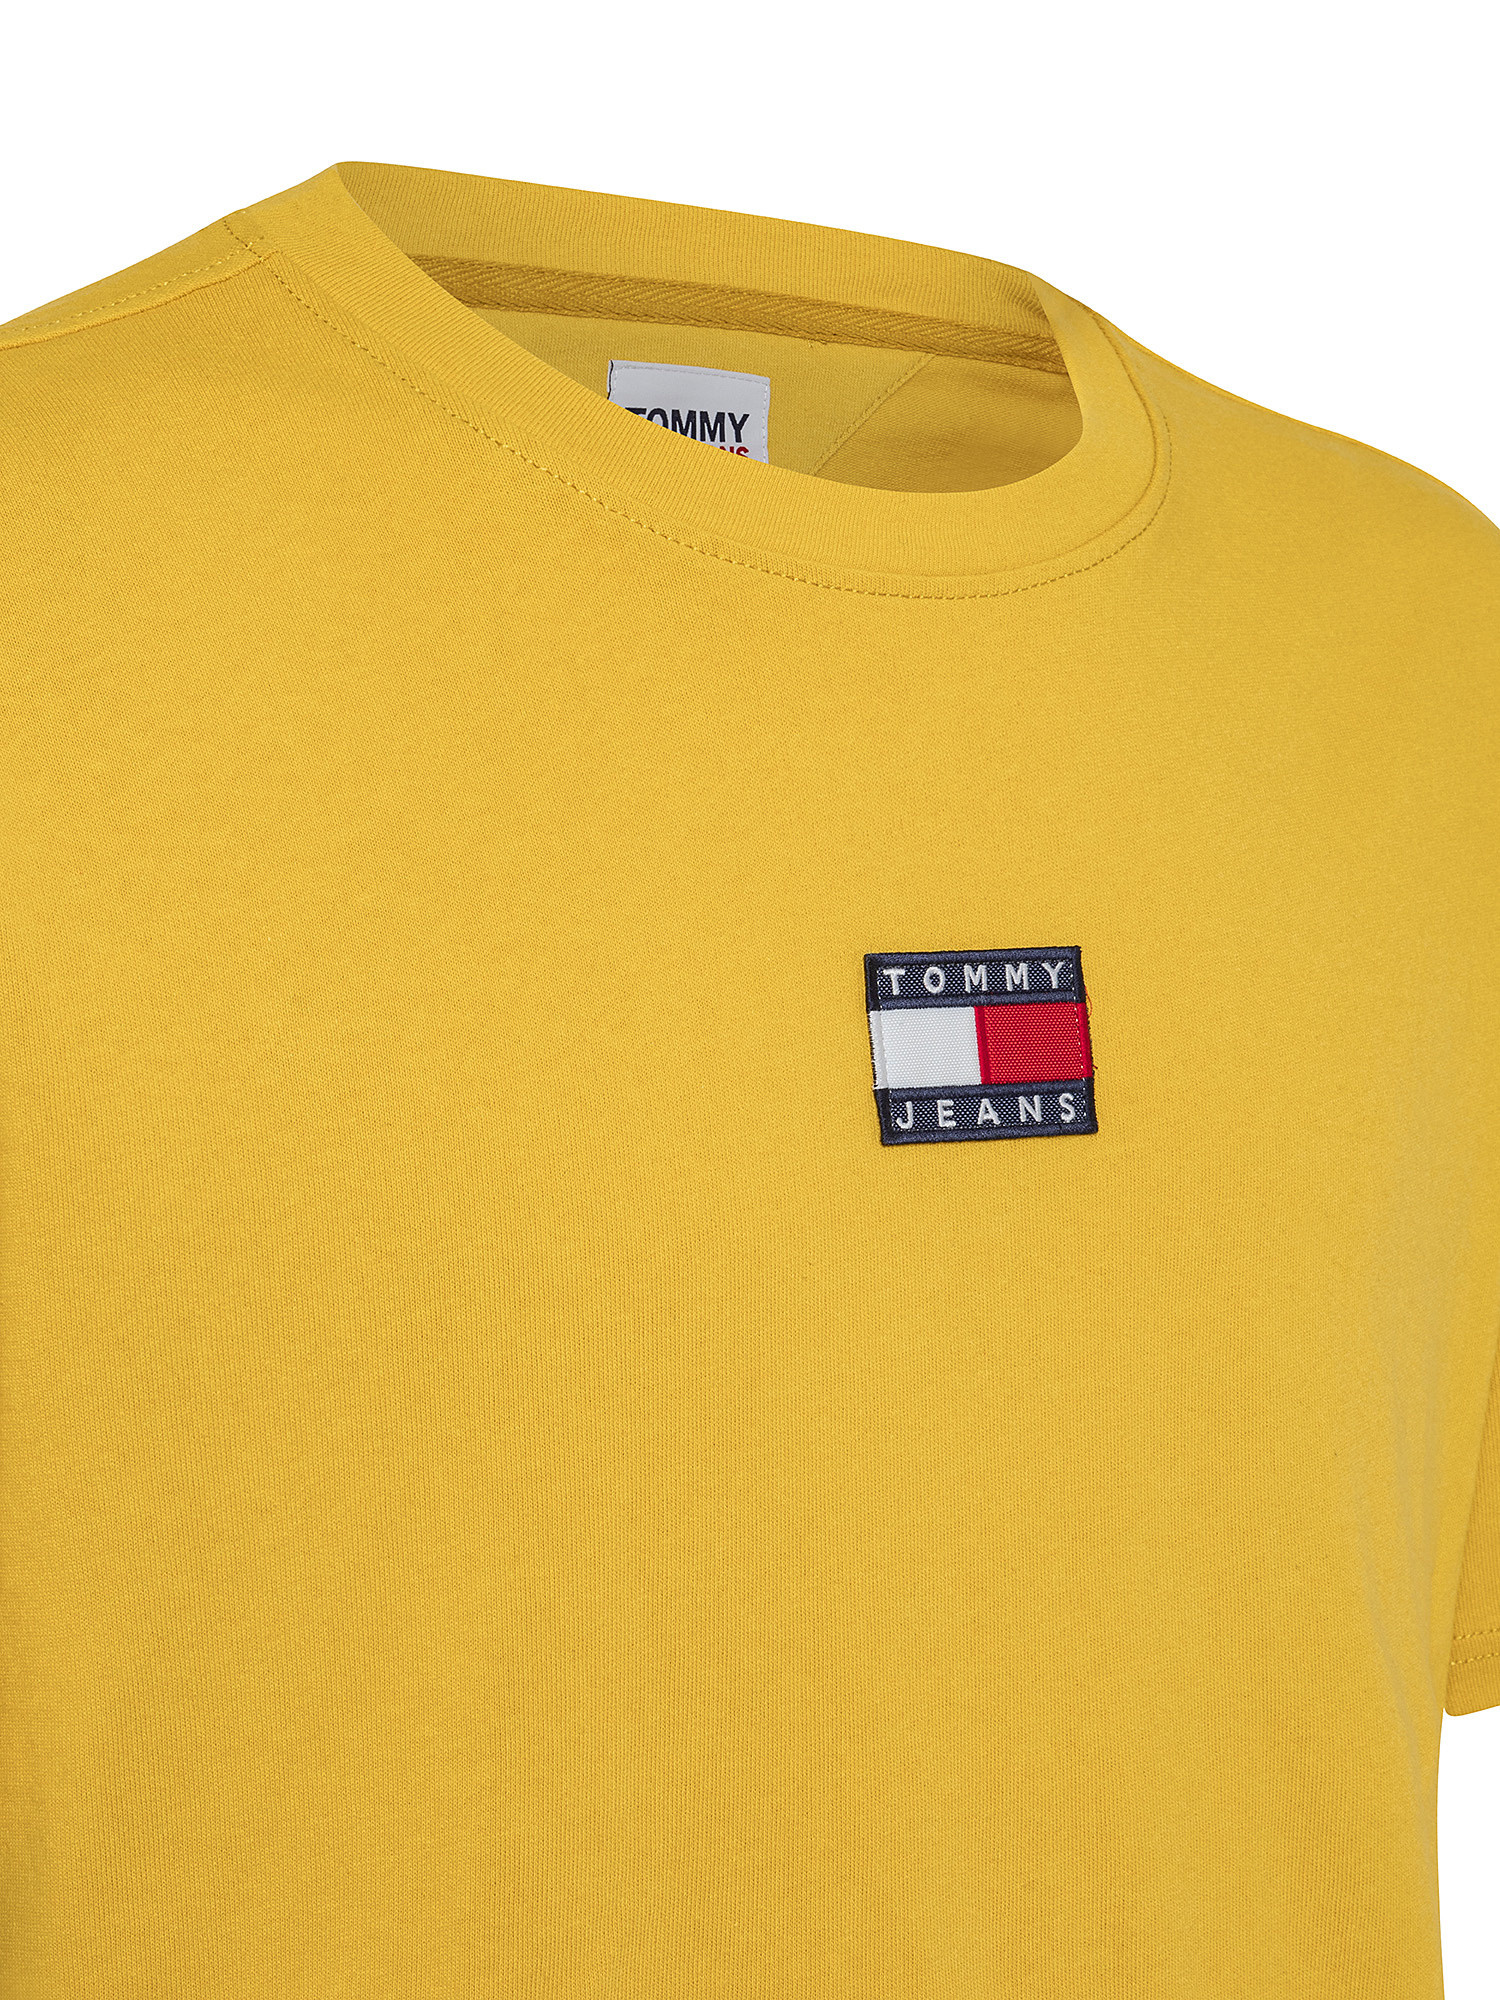 Tommy Jeans - T-shirt girocollo con logo, Giallo, large image number 2